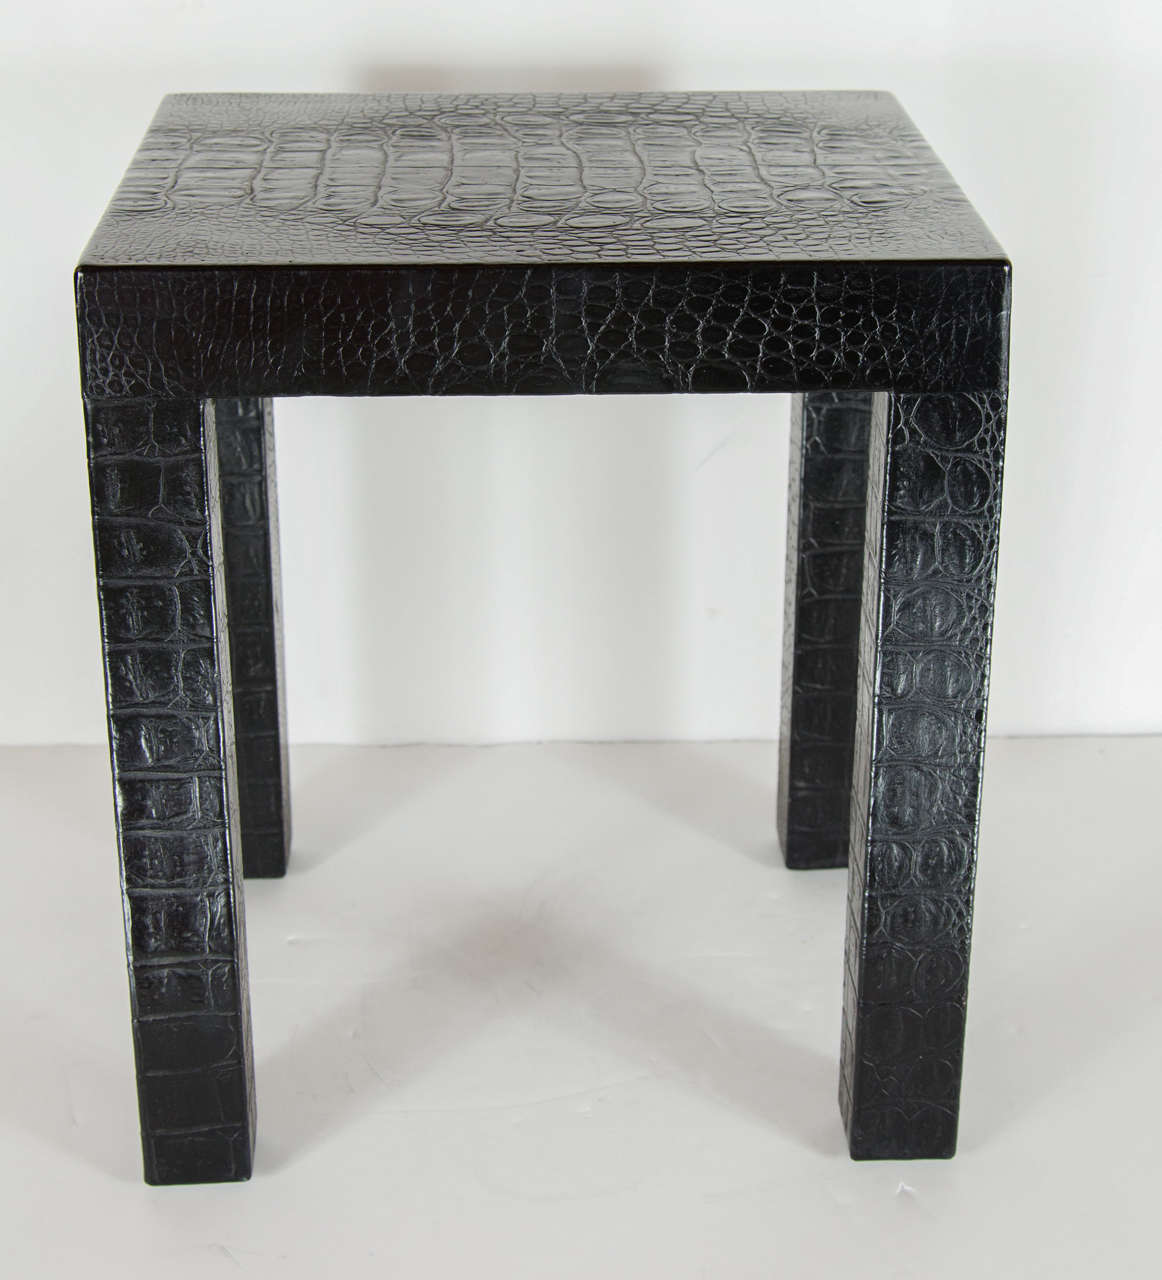 Ultra Chic pair of square parsons side tables are solid wood construction that have been clad in a rich black clad crocodile. Can be used separately as side tables or close to each other as a cocktail table.